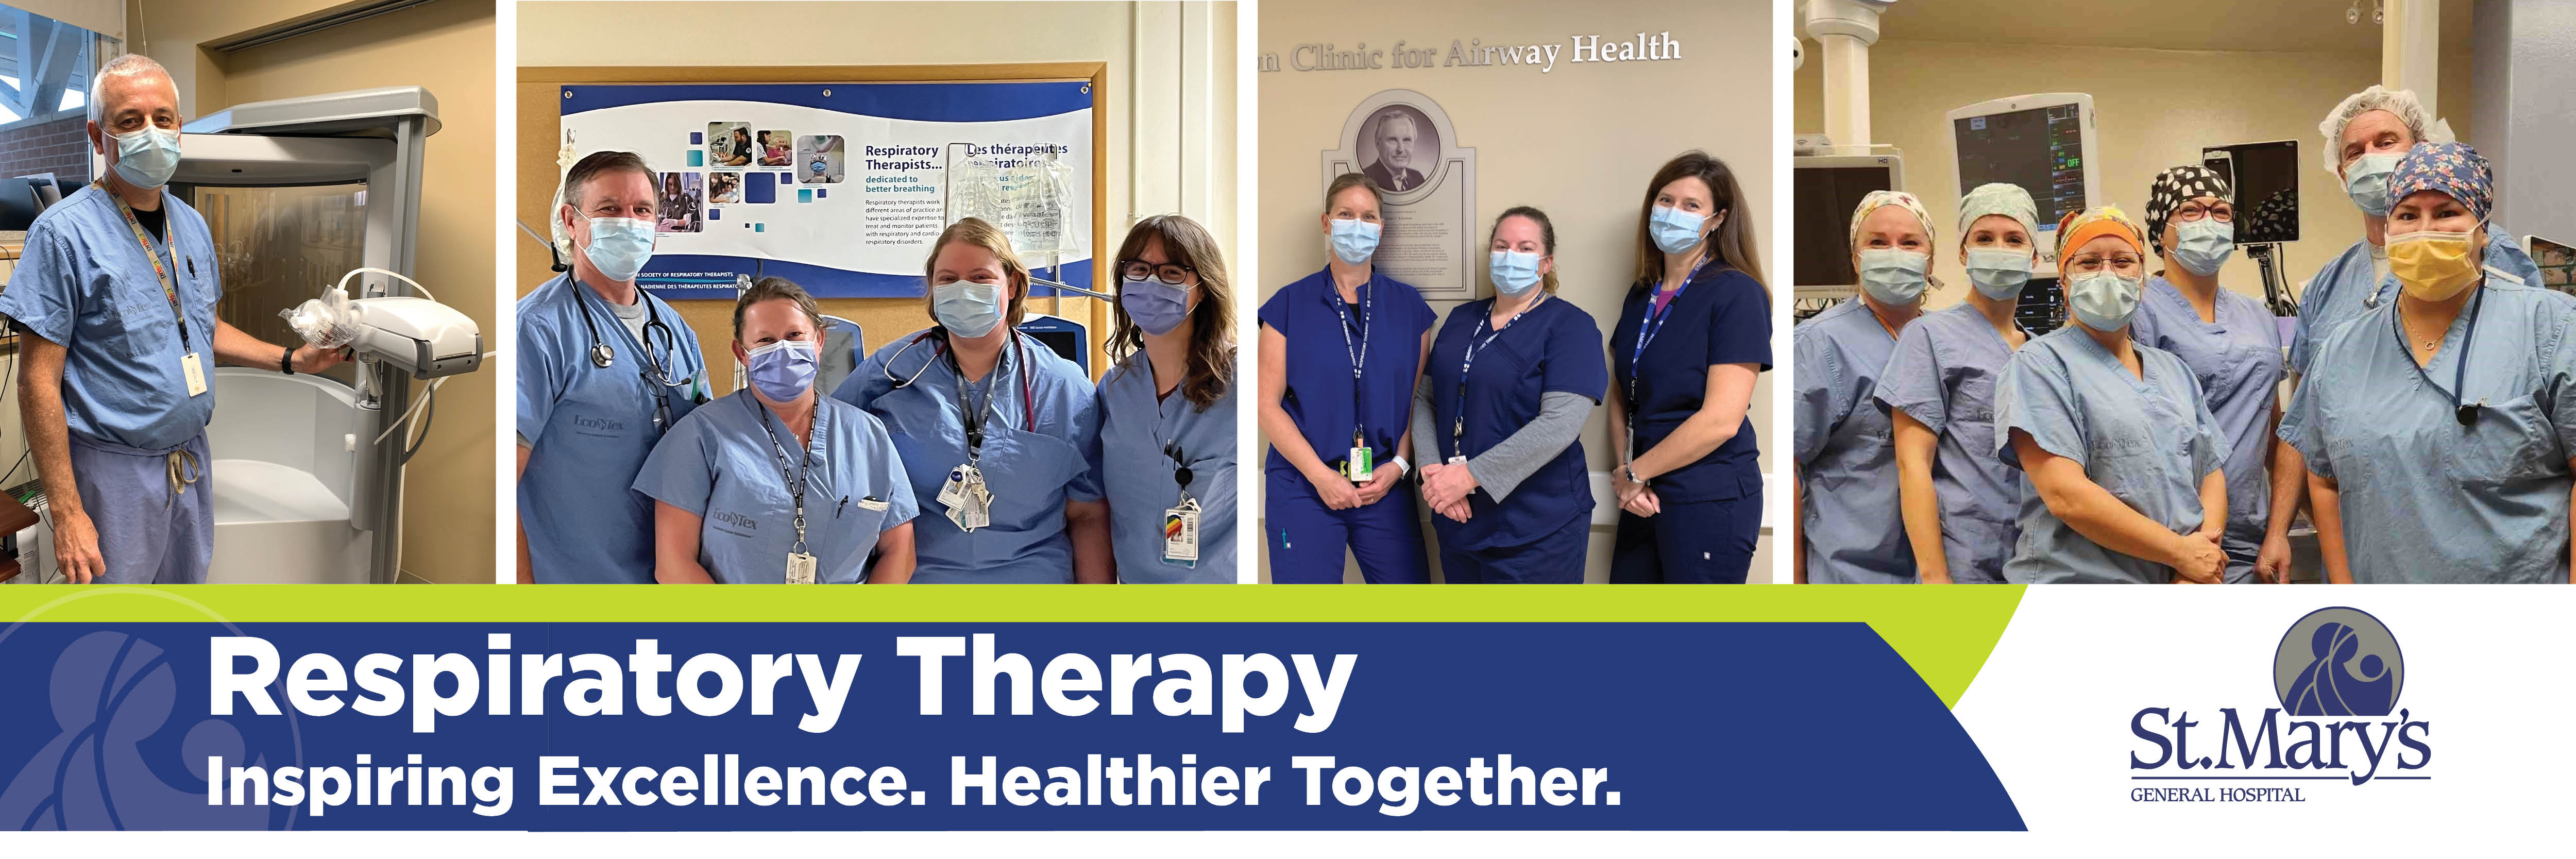 Collage of St. Mary's Respiratory Therapy Team 